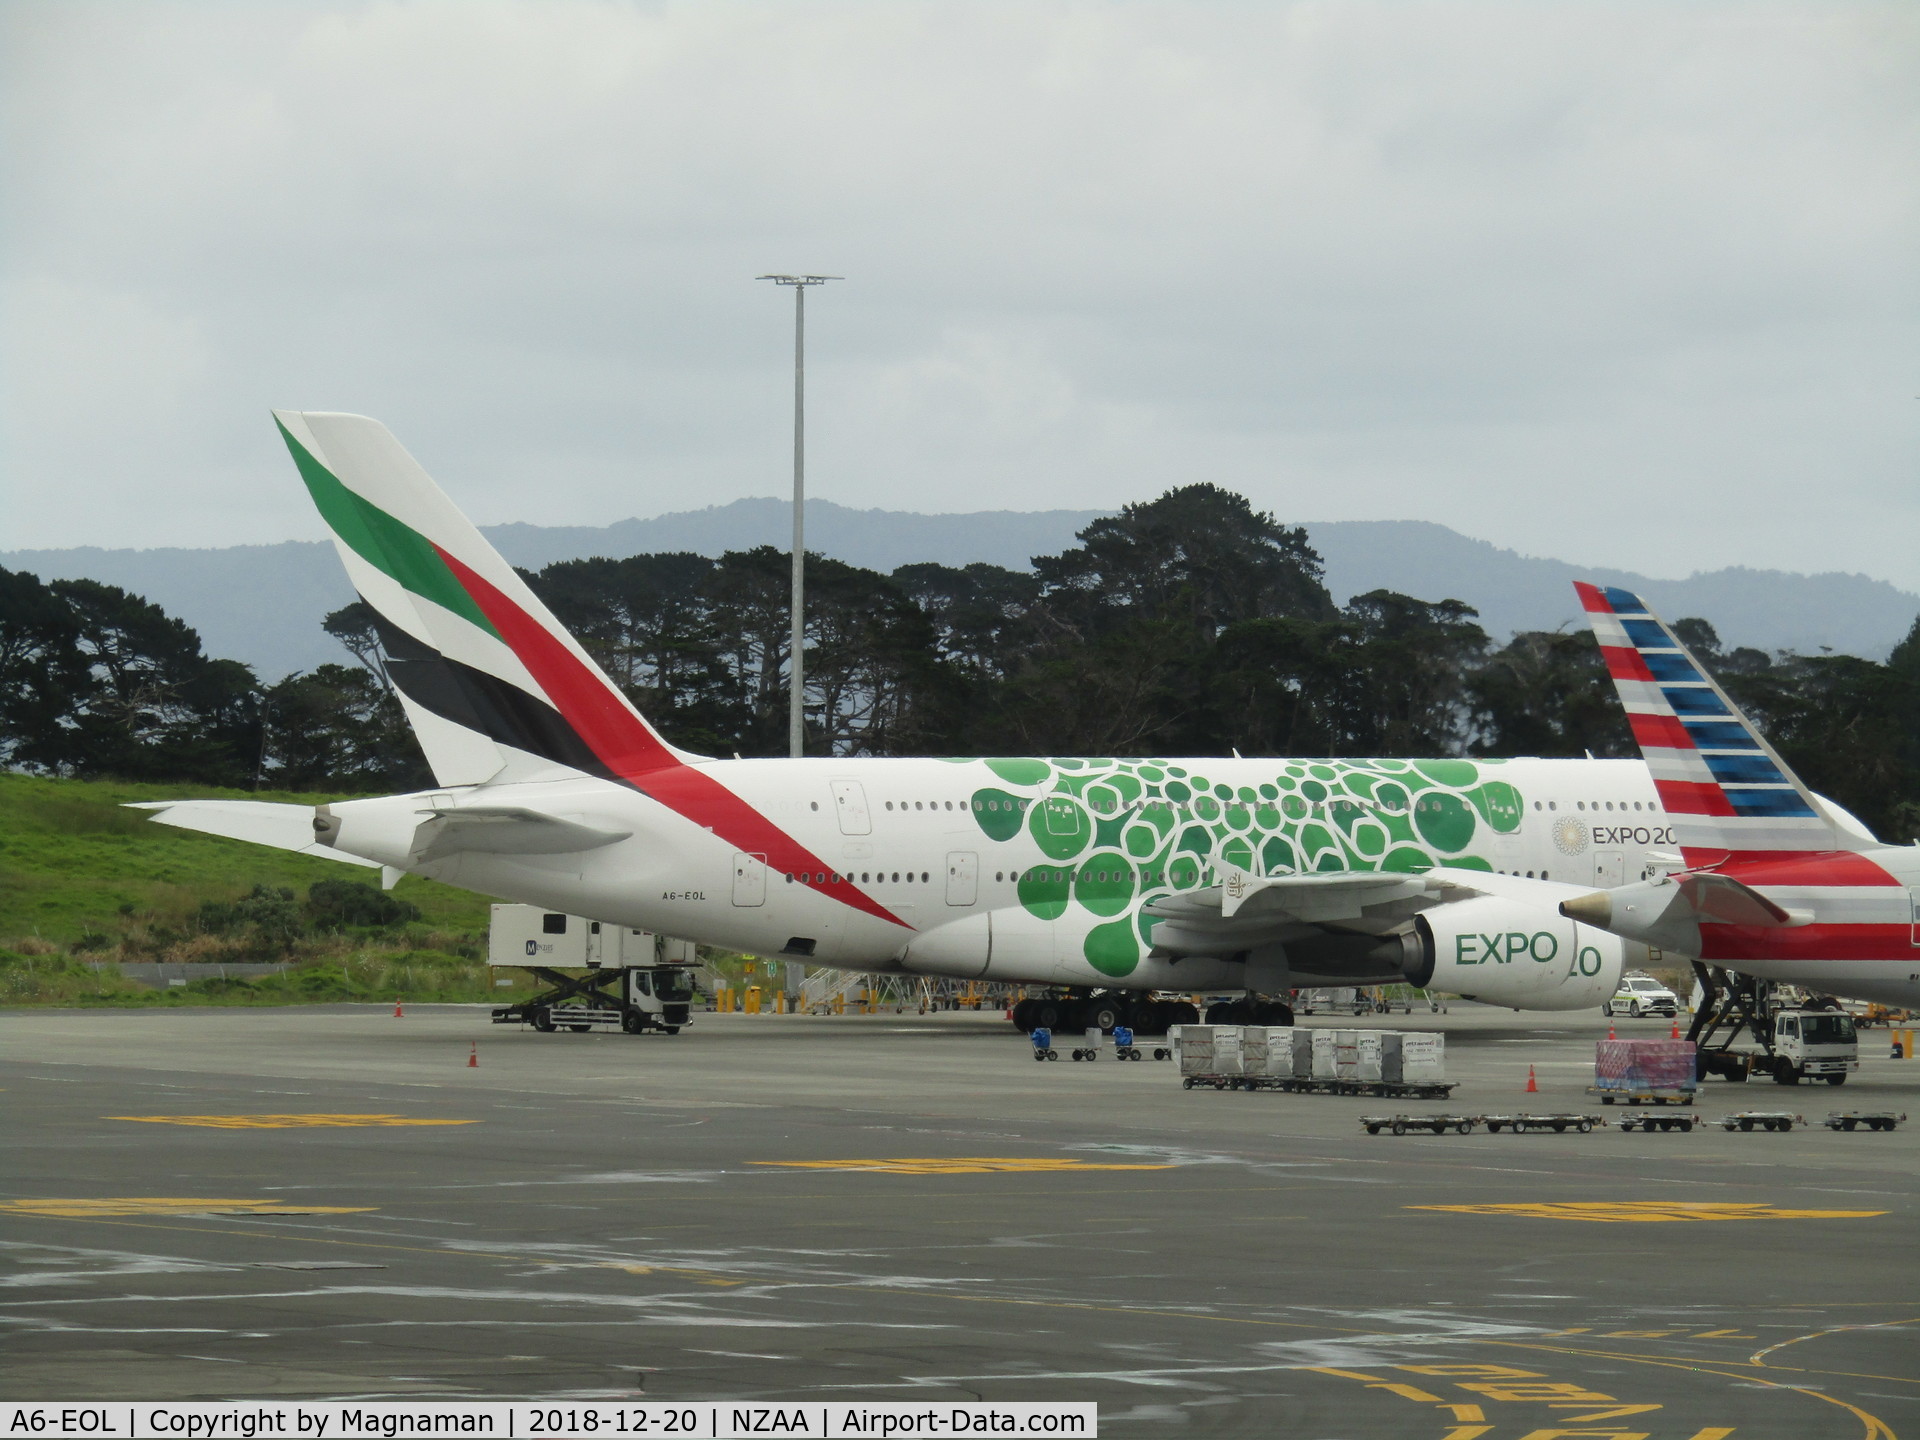 A6-EOL, 2015 Airbus A380-861 C/N 186, on stand at AKL